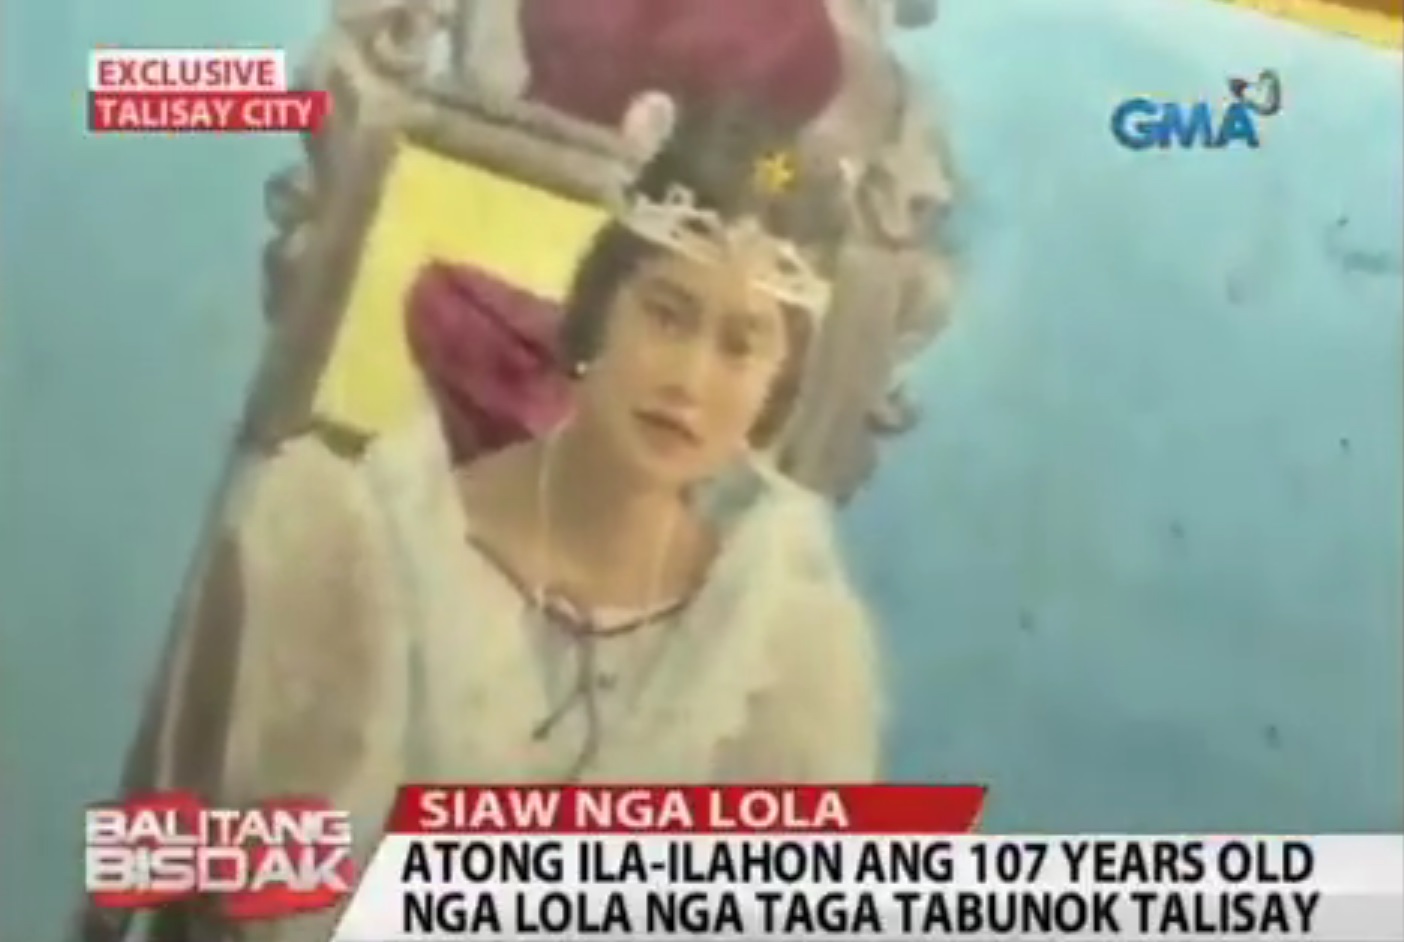 In 1927, aged 17, crowned as Miss Sogod.